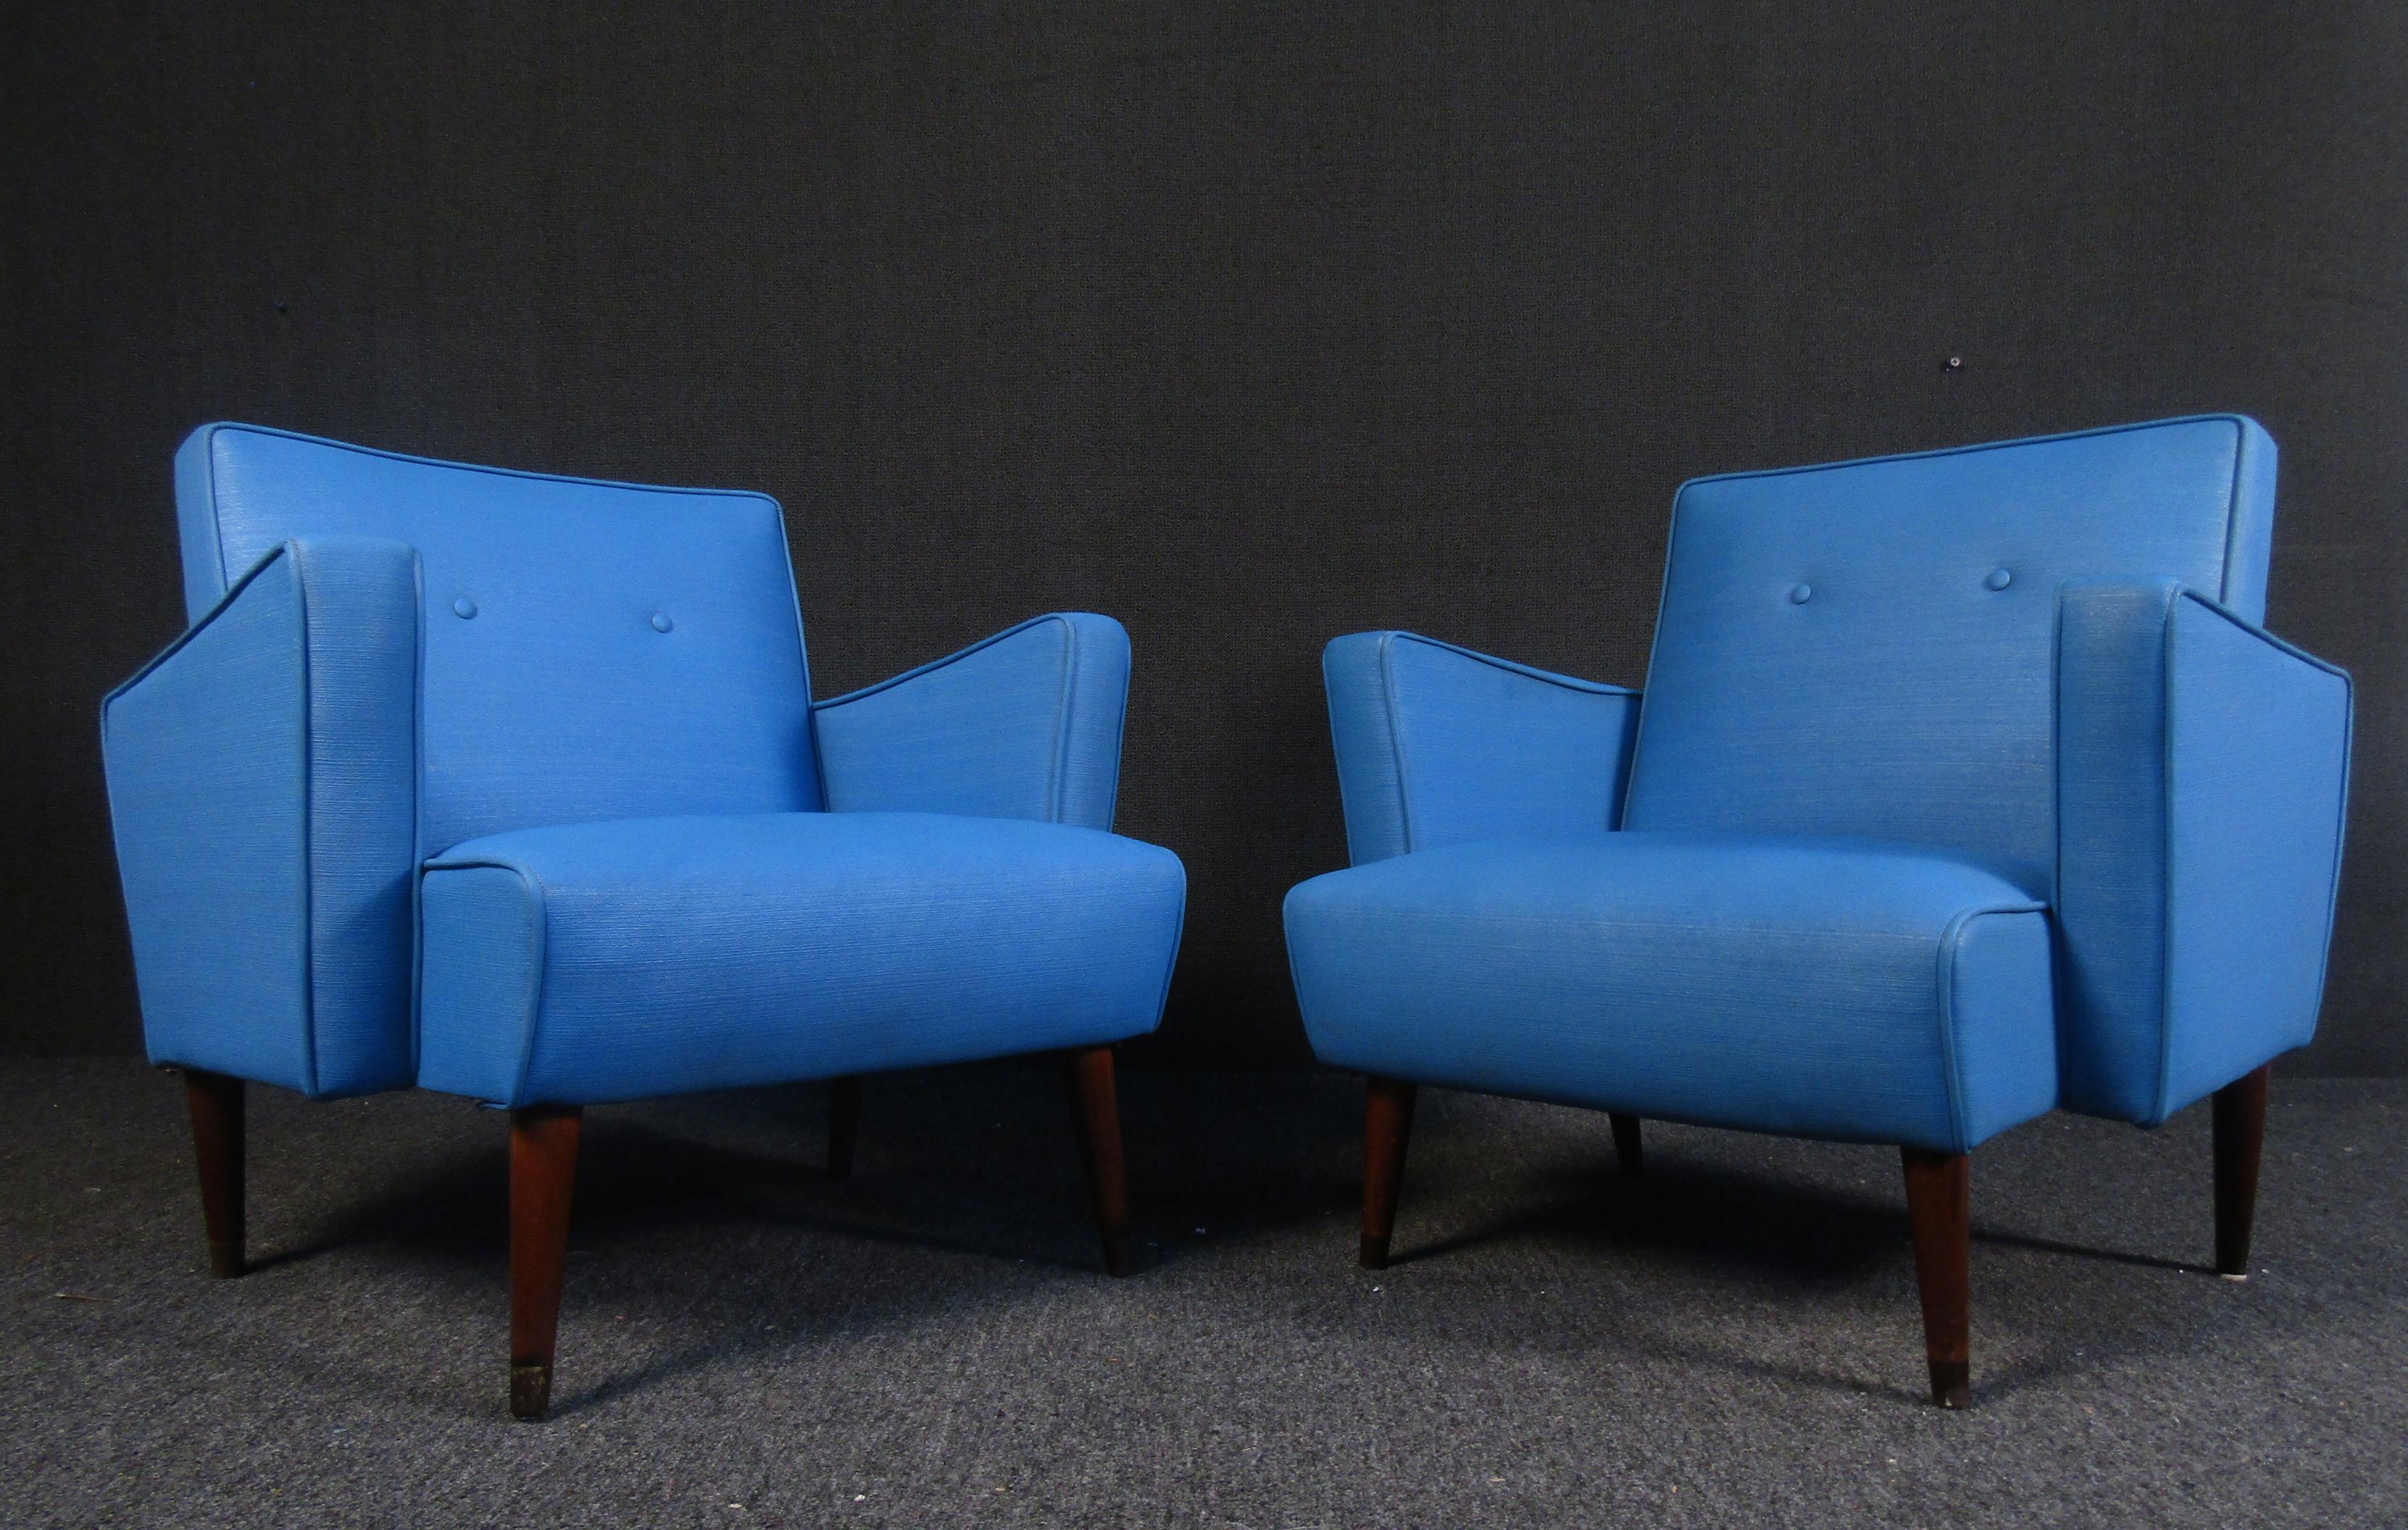 A beautiful pair of vintage modern armchairs with tapered walnut legs and gorgeous blue upholstery. The wonderful design offers maximum comfort without sacrificing style. A perfect addition to any home, business, or office. Please confirm the item